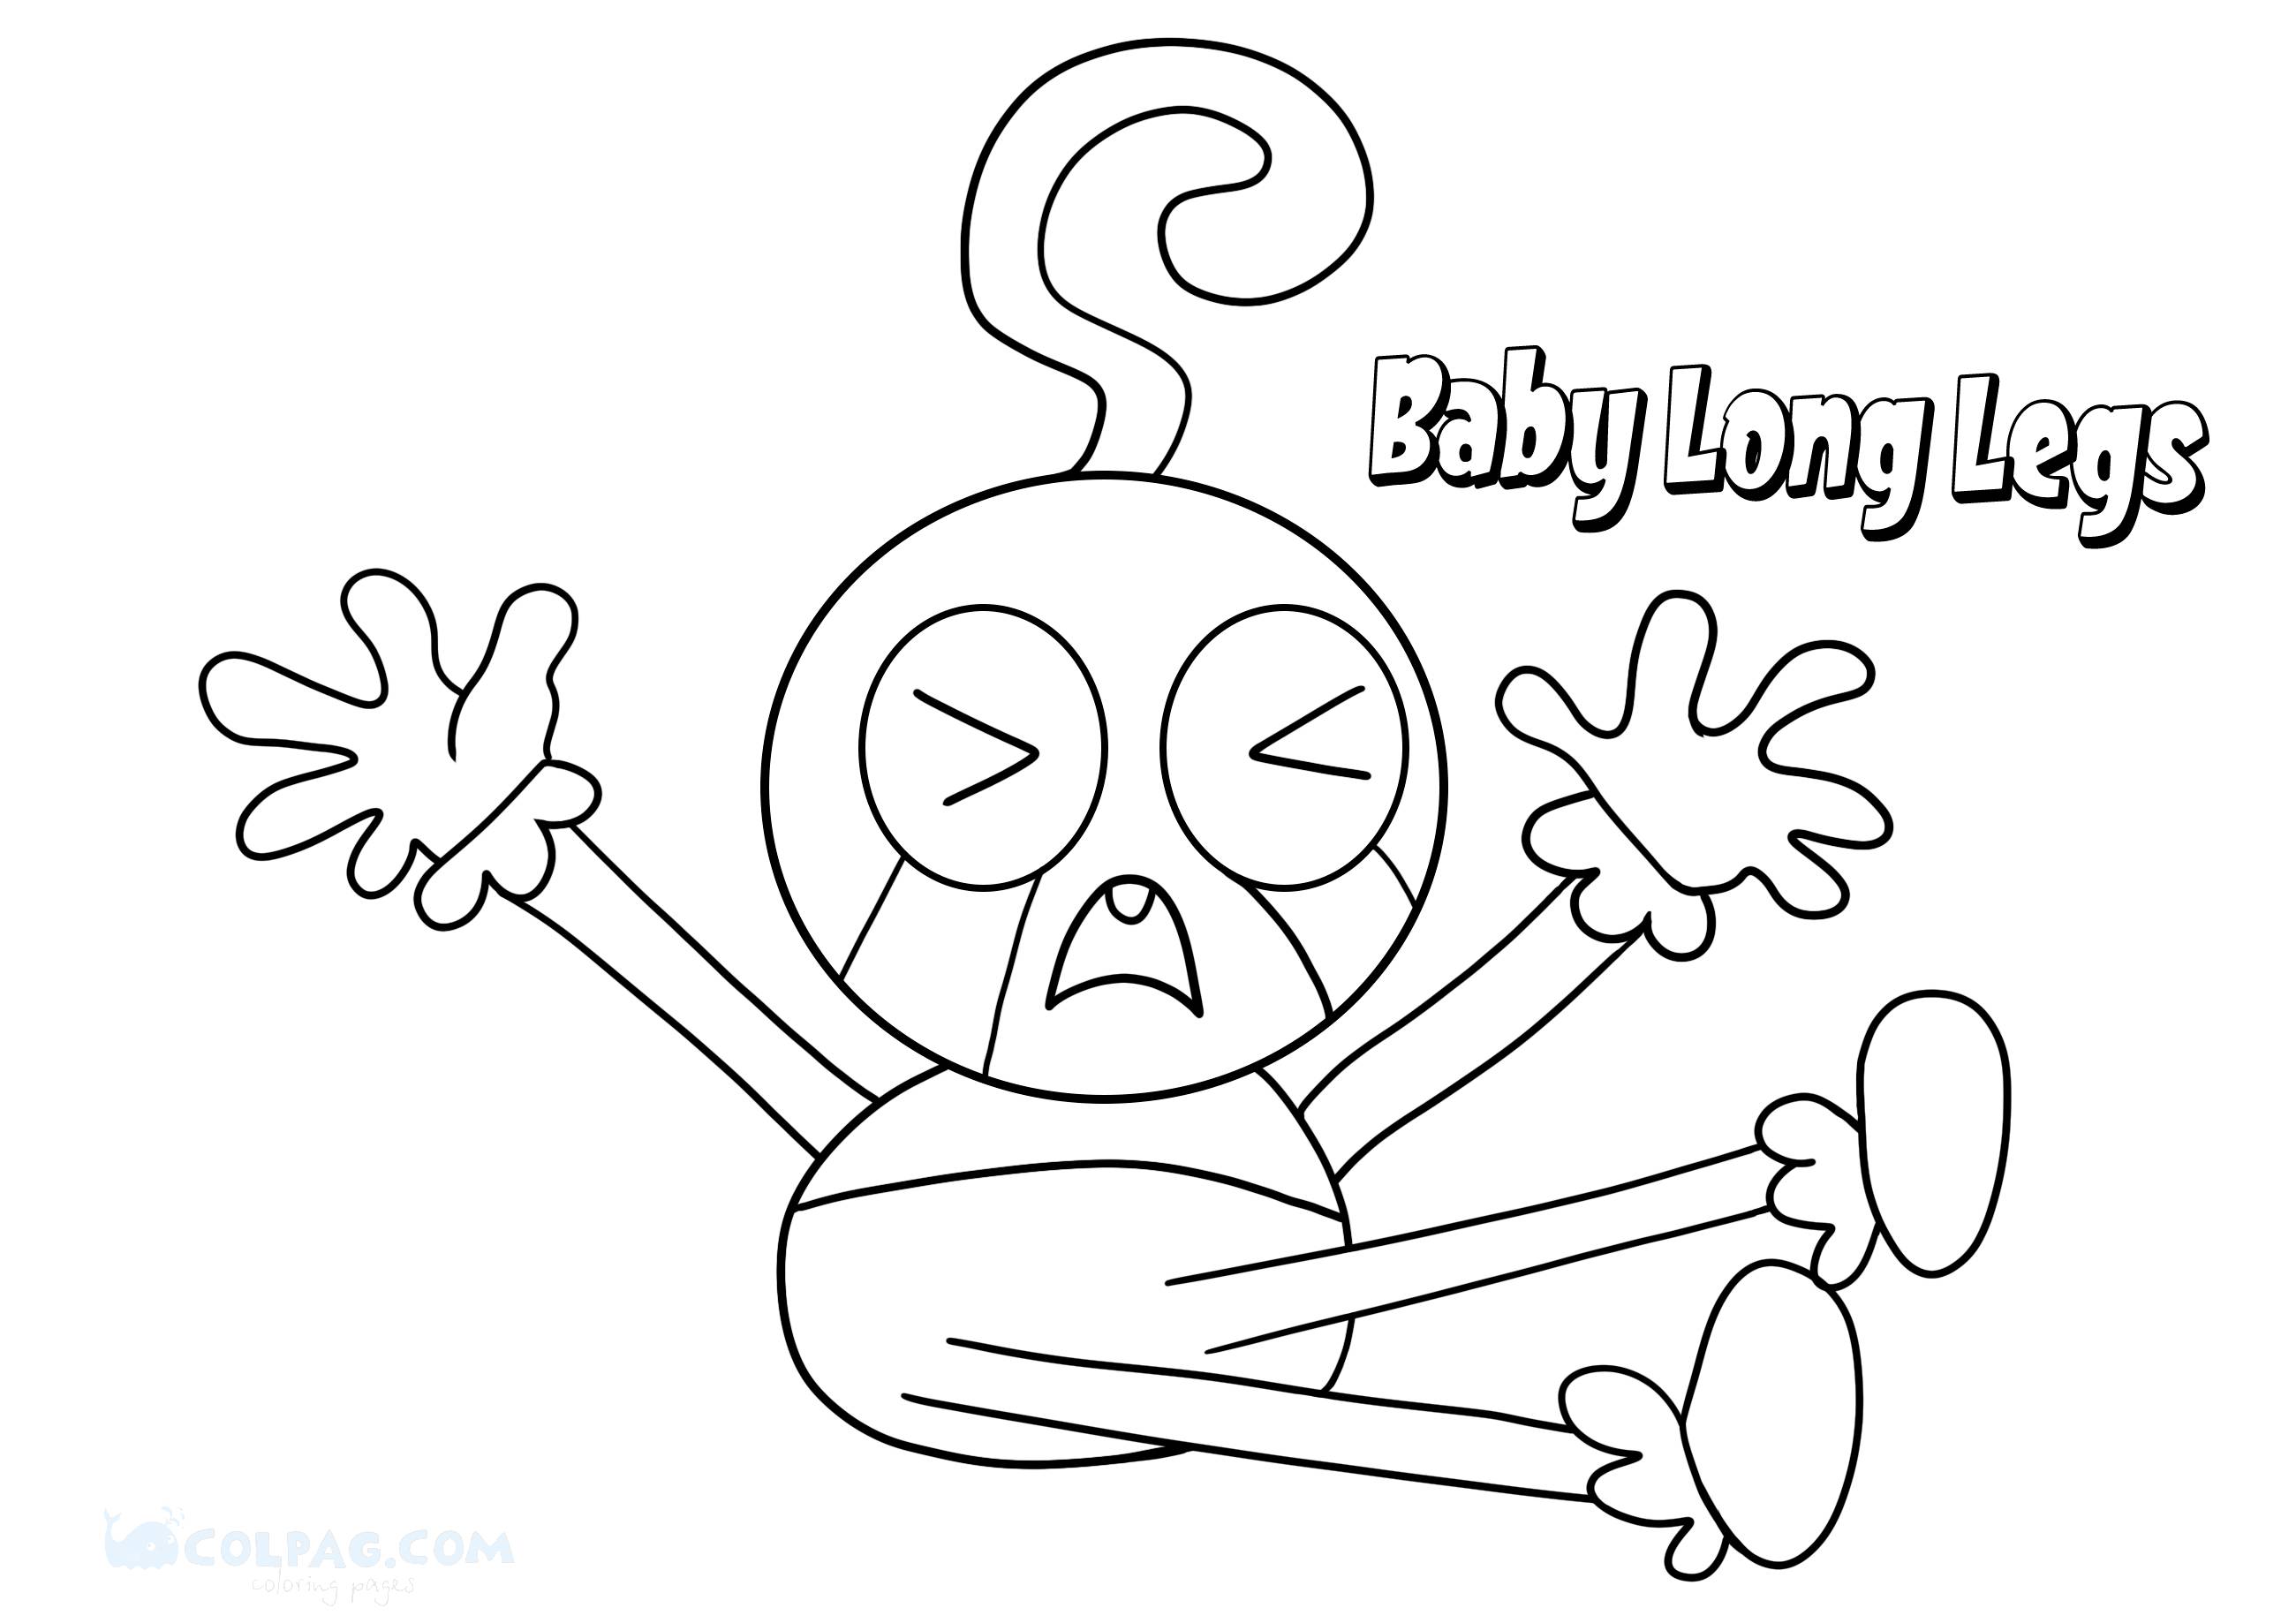 baby-long-legs-coloring-page-colpag-com-16